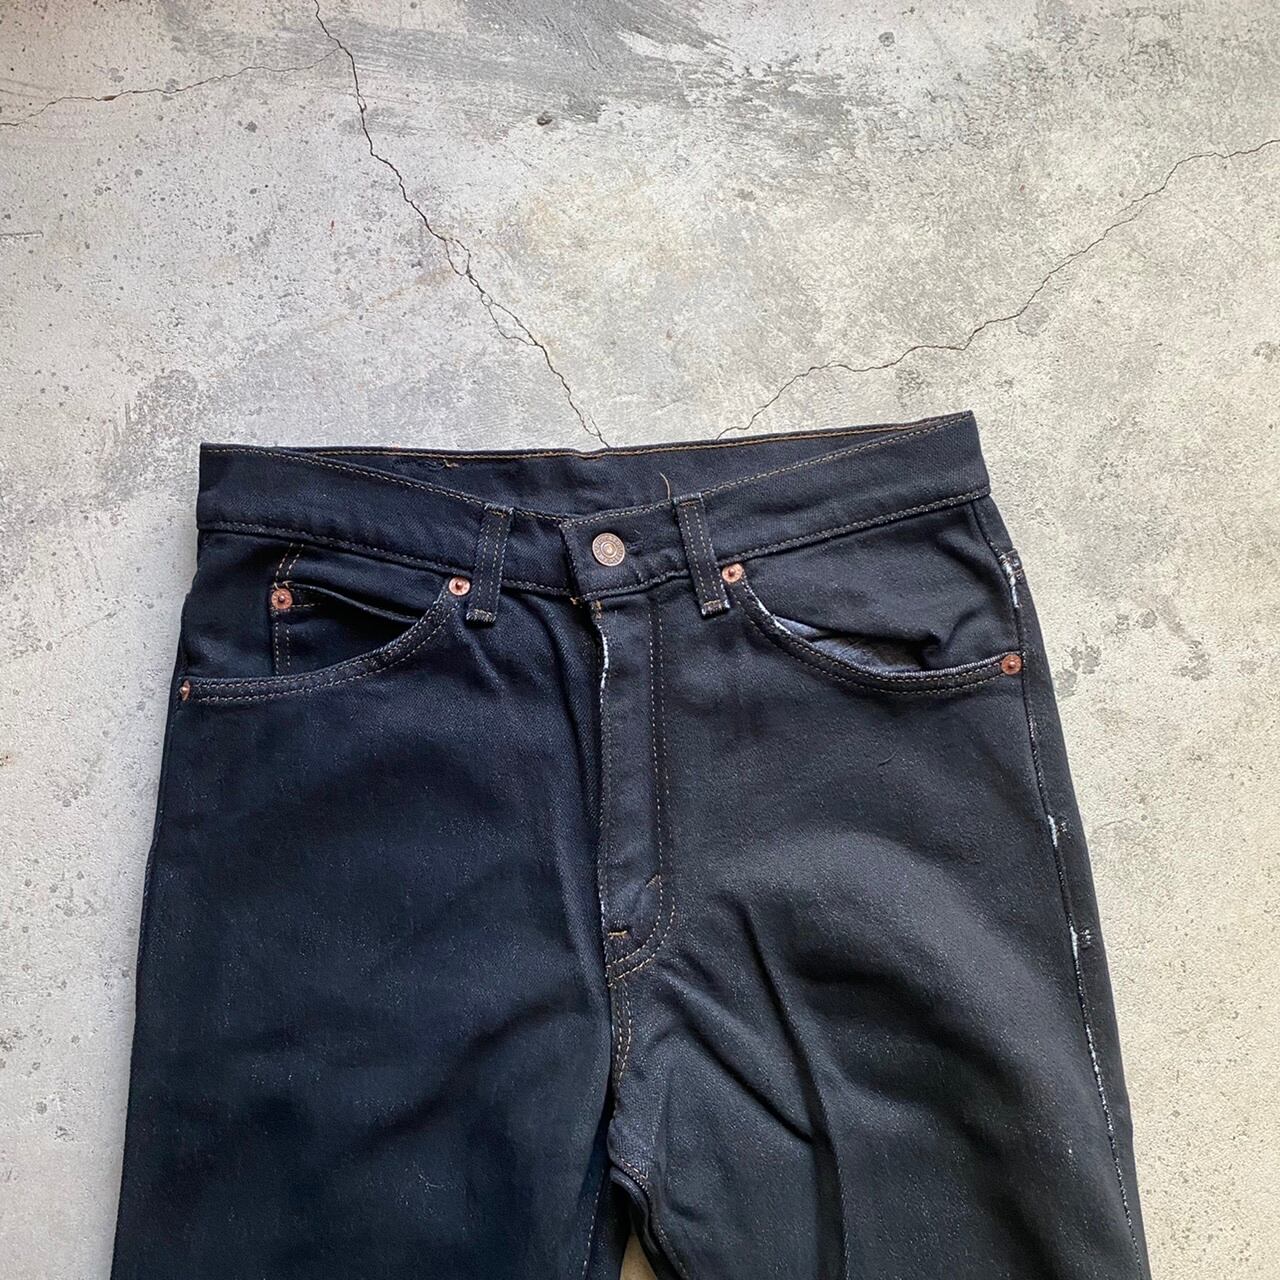 USED 古着Levi's 90年代　リーバイス　後染め　ブラック　517 ブーツカット　ストレッチ　ジーンズ　W31 USA製　アメリカ製　 ヴィンテージ | magazines webshop powered by BASE